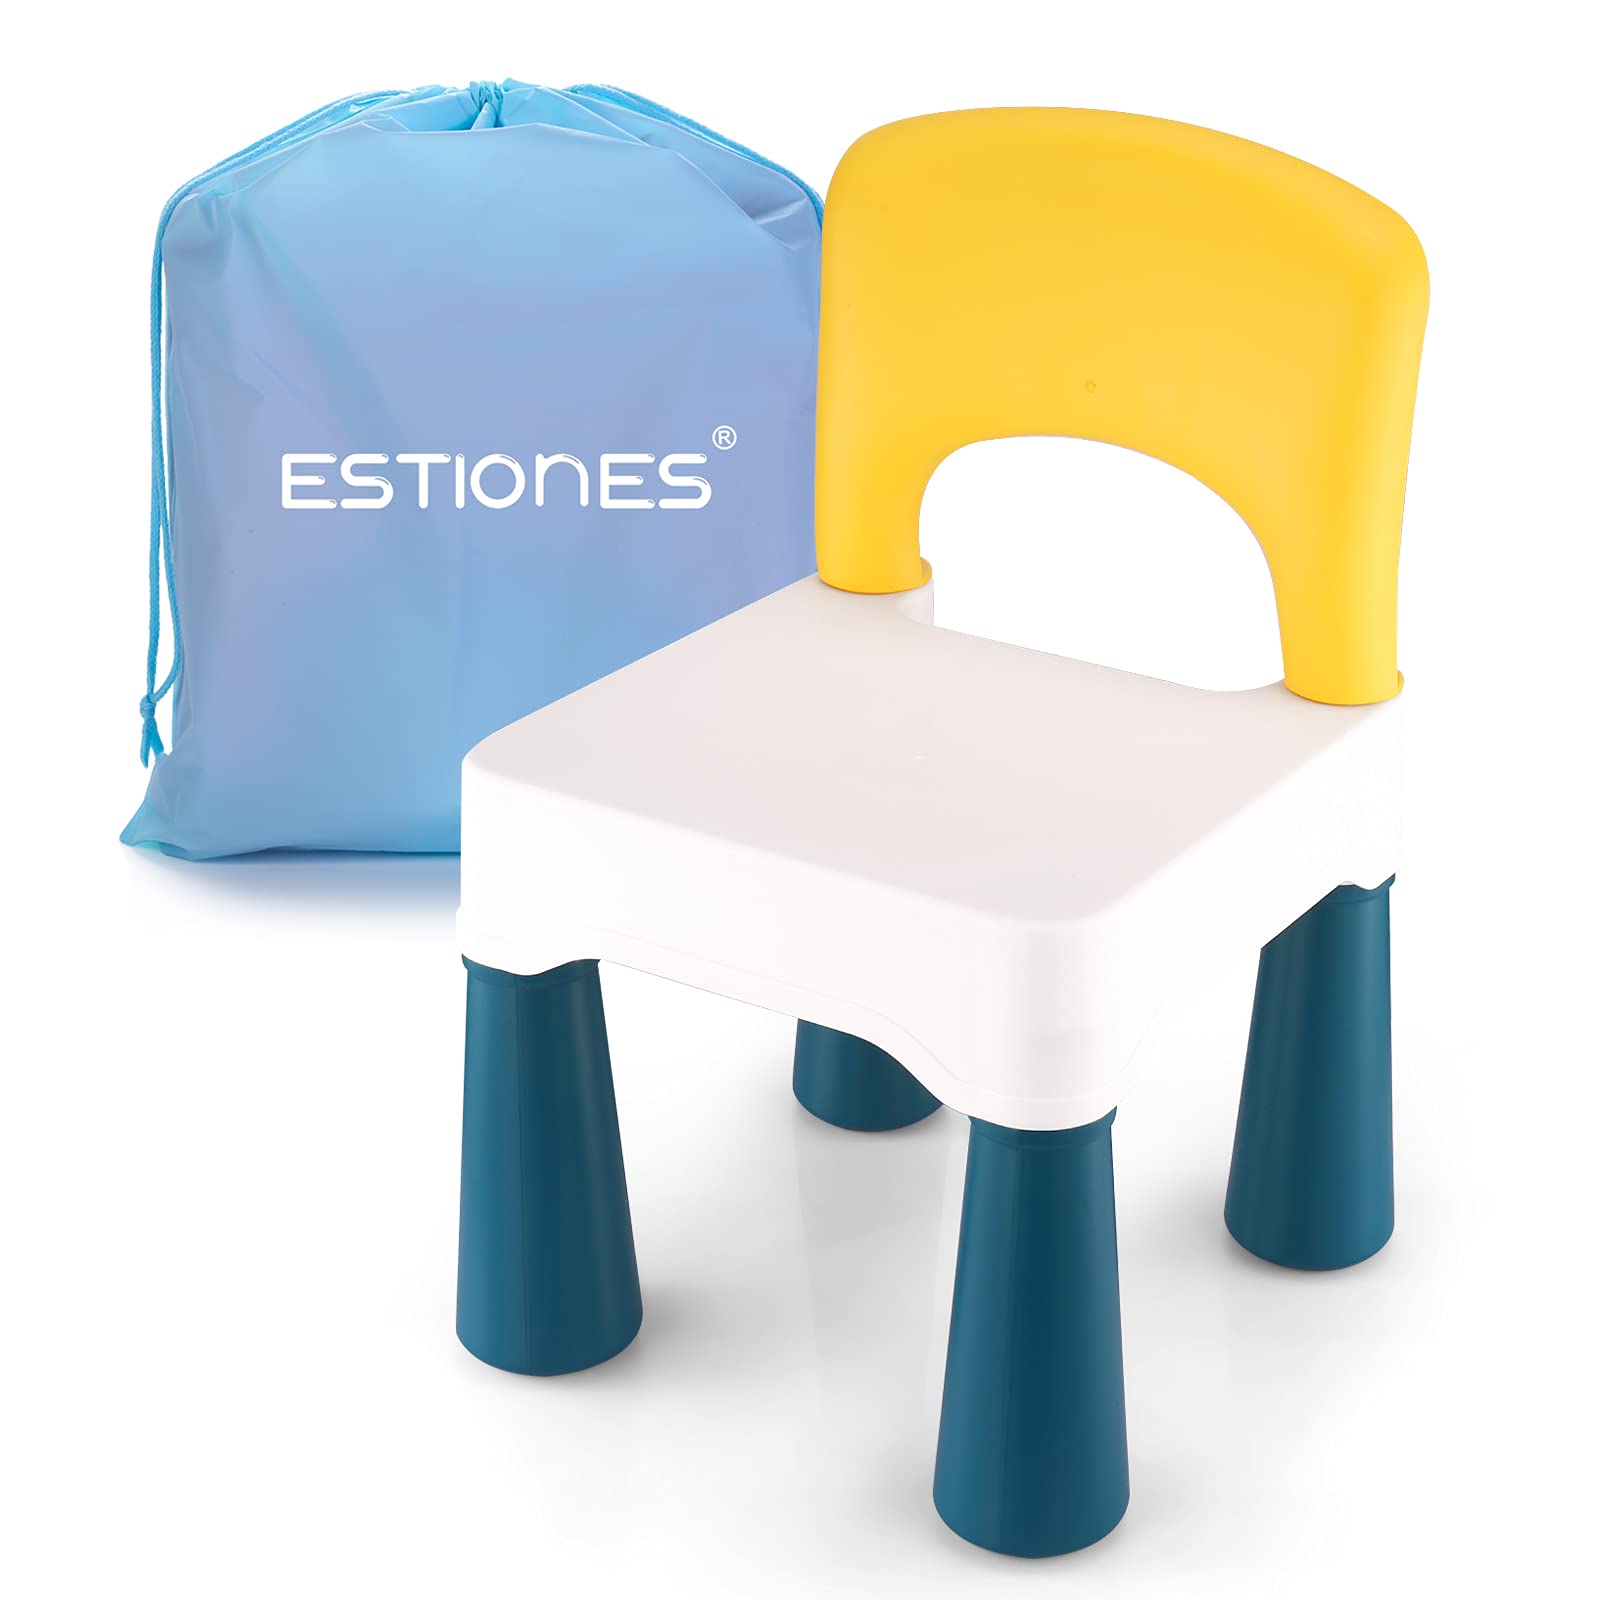 ESTIONES Kids Chair, Toddler Chair, Toddler Chairs for Boys and Girls, an Extra Portable Storage Bag, Ergonomic Design, Environmentally Friendly Du...